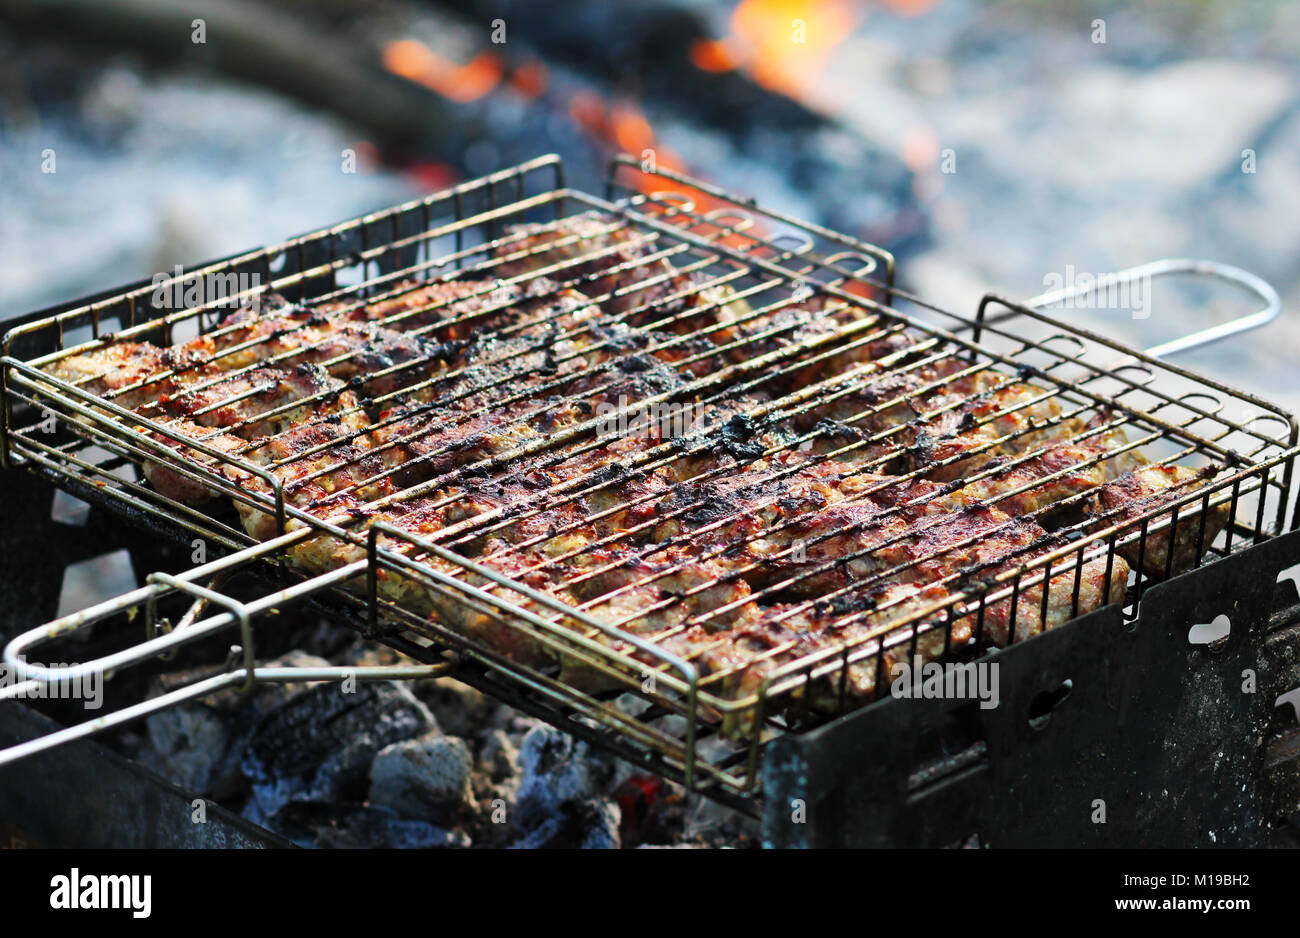 Meat, roasted over an open fire, barbecue, picnic outdoors. Stock Photo